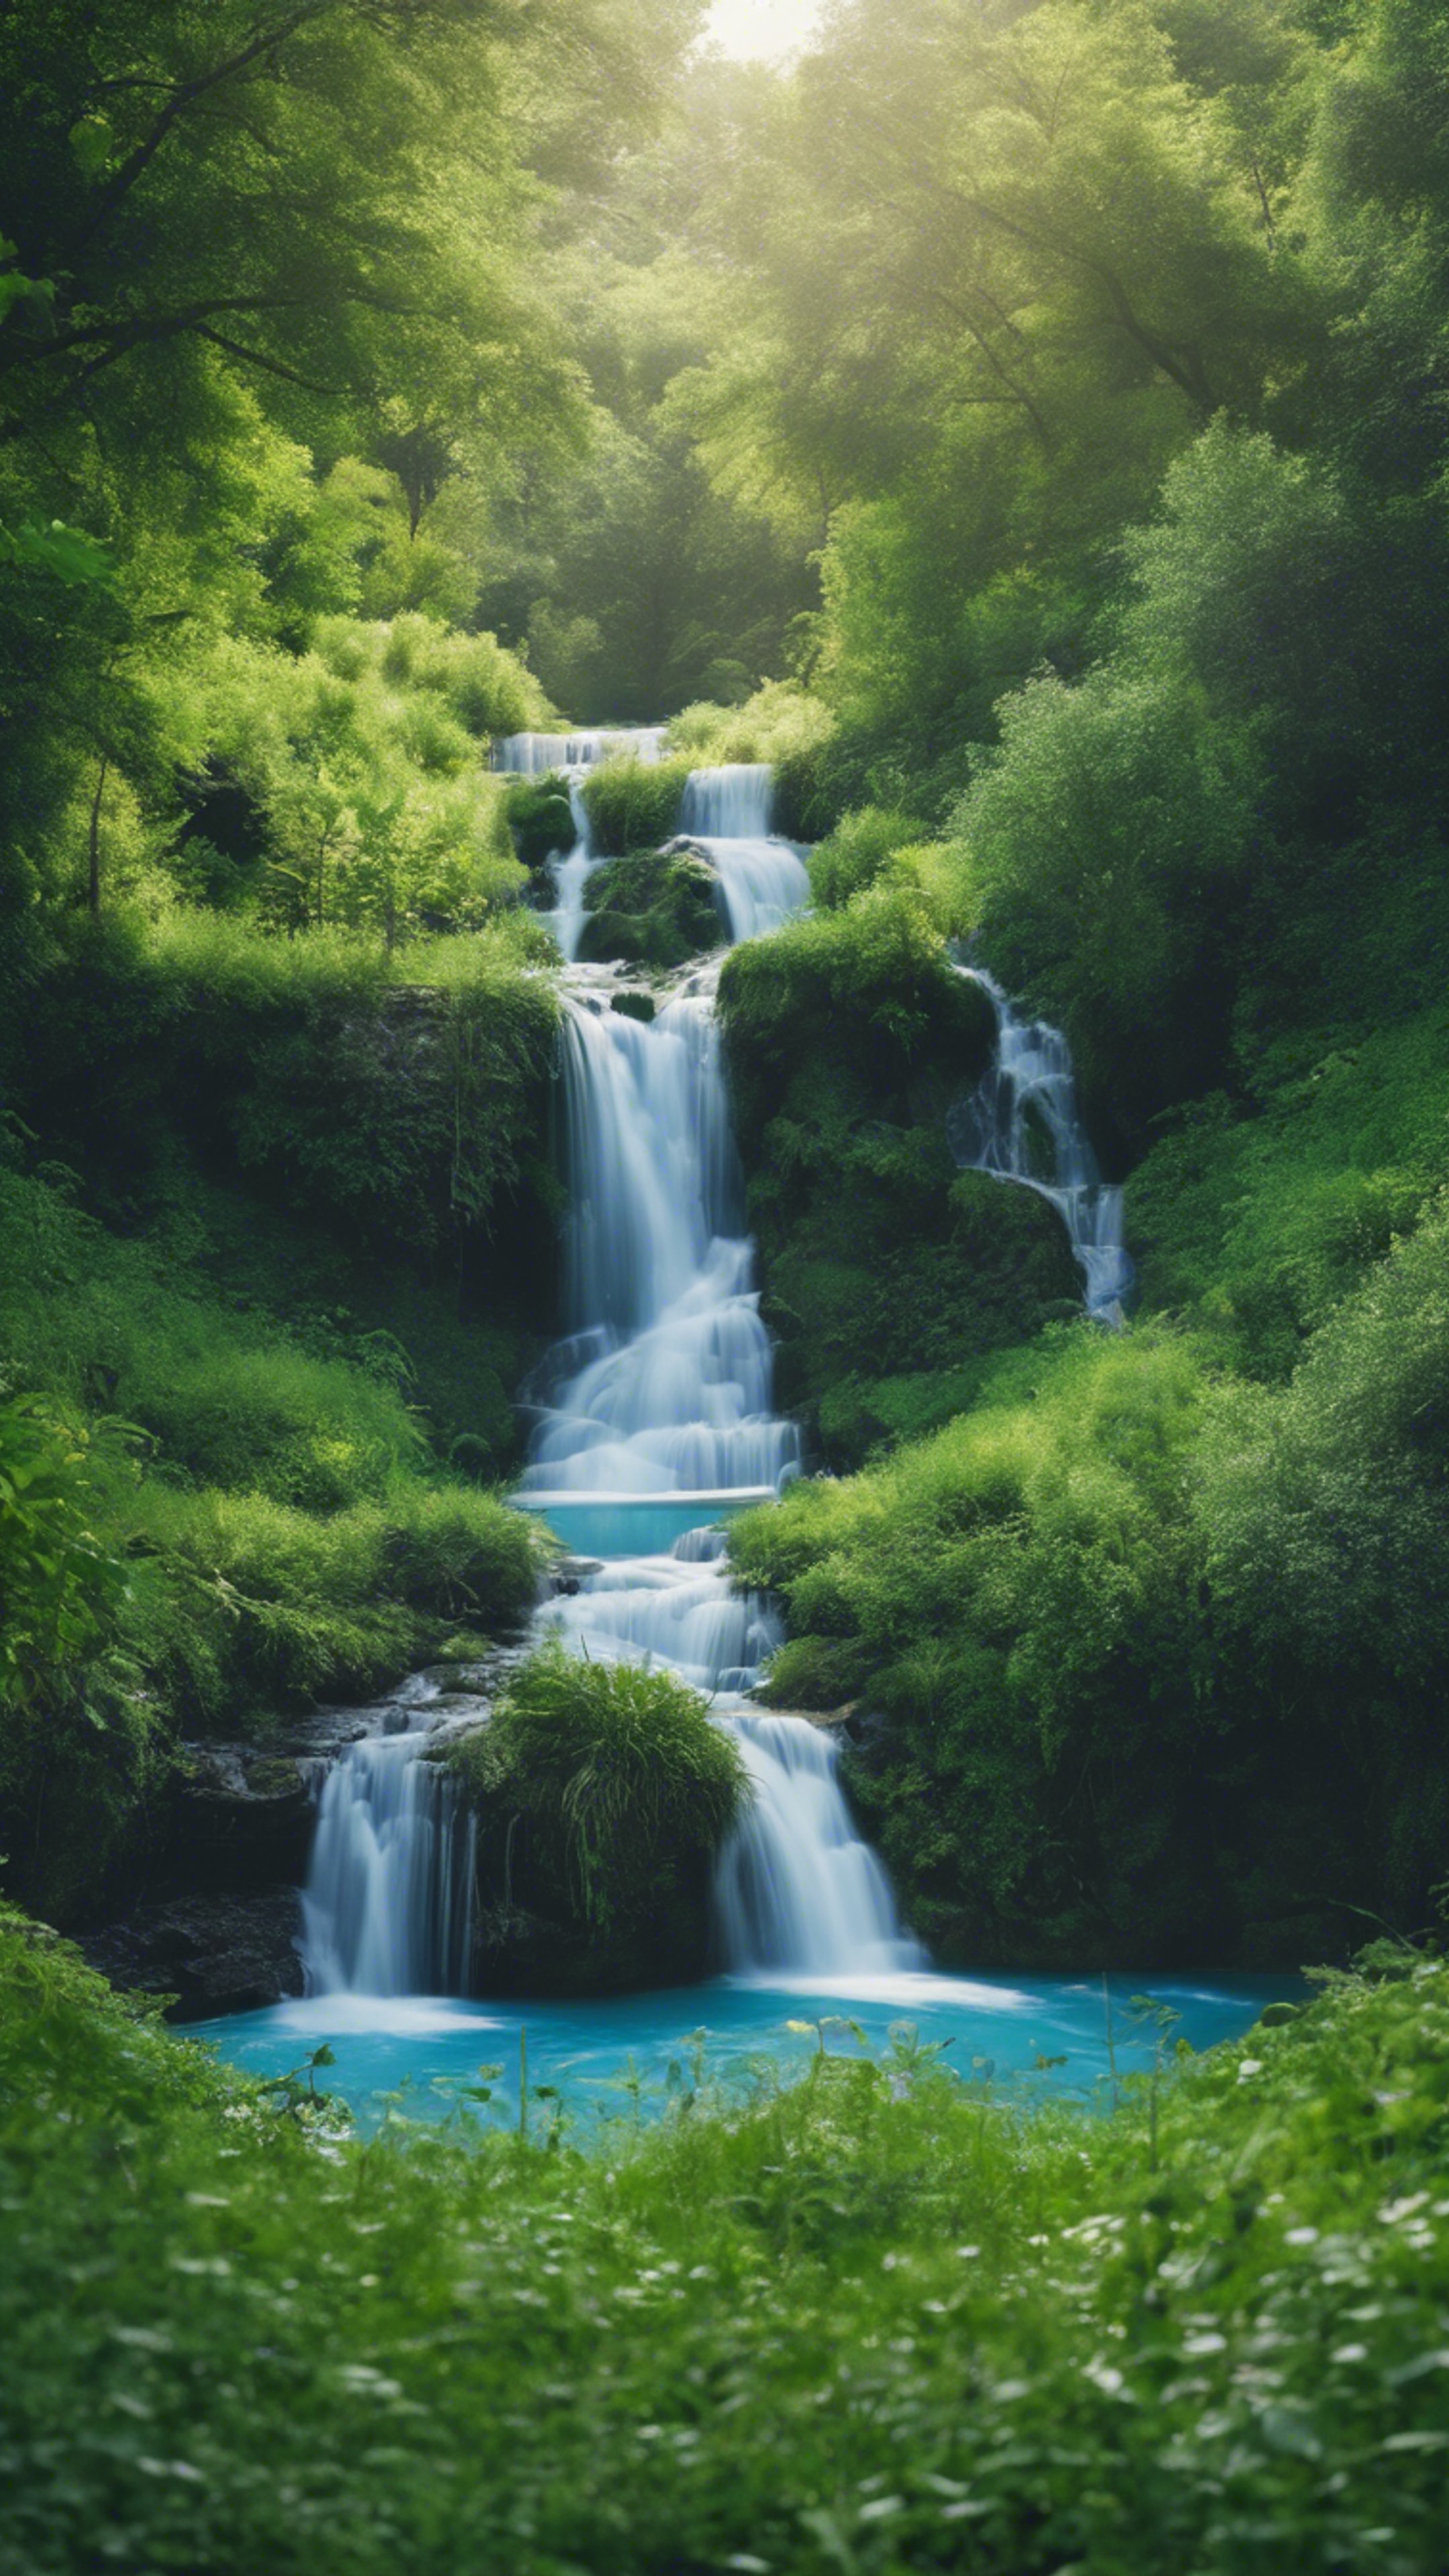 A cool blue waterfall cascading into a lush green meadow. Papel de parede[661f80b9c31c460db5eb]